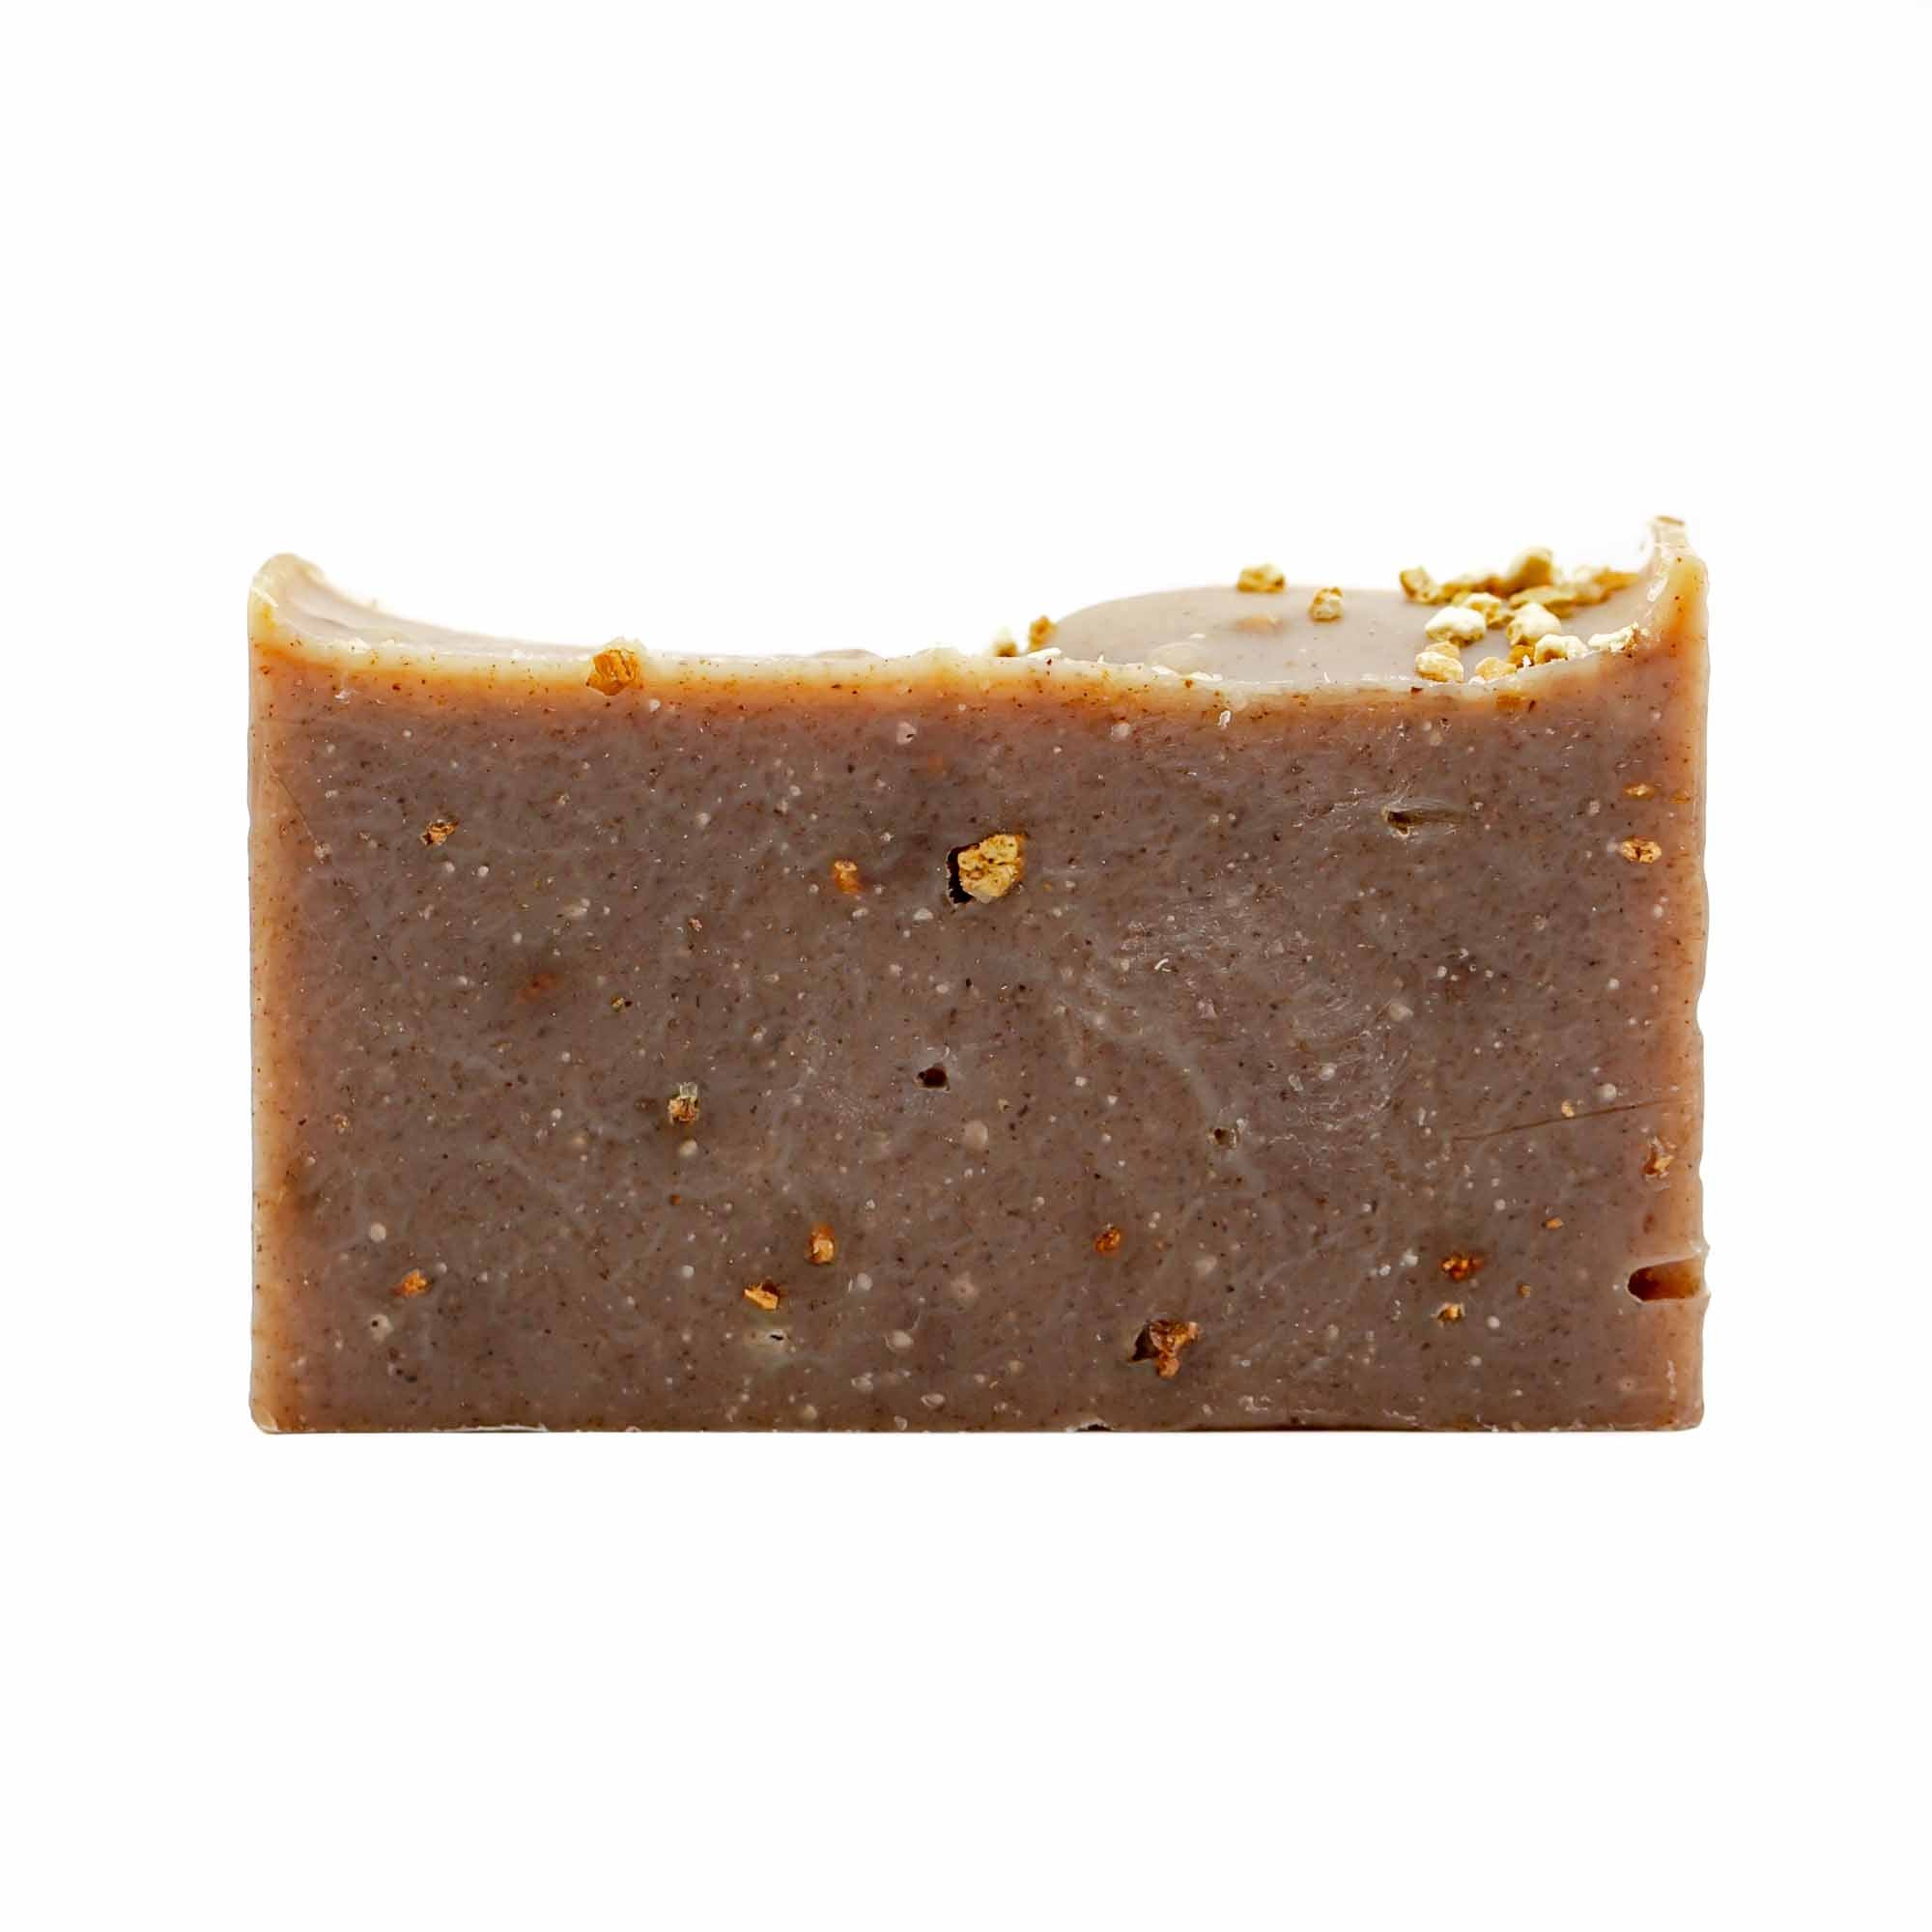 welliver goods - cranberry orange bar soap - Mortise And Tenon